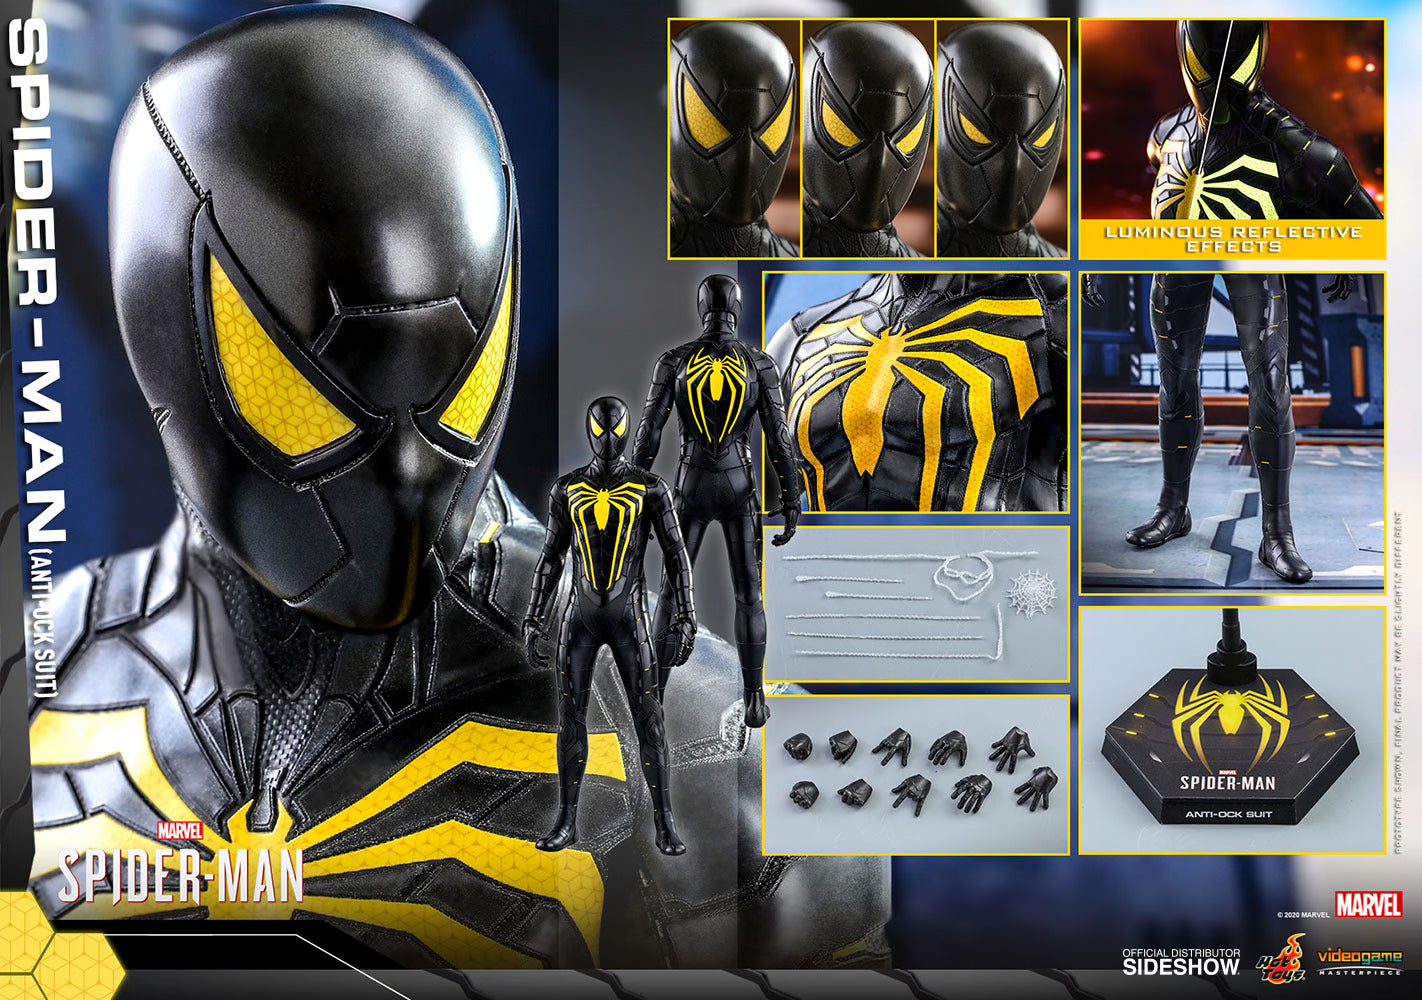 HOT TOYS MARVEL SPIDER-MAN SPIDER-MAN (ANTI-OCK SUIT) 1/6 VGM44 - Anotoys Collectibles